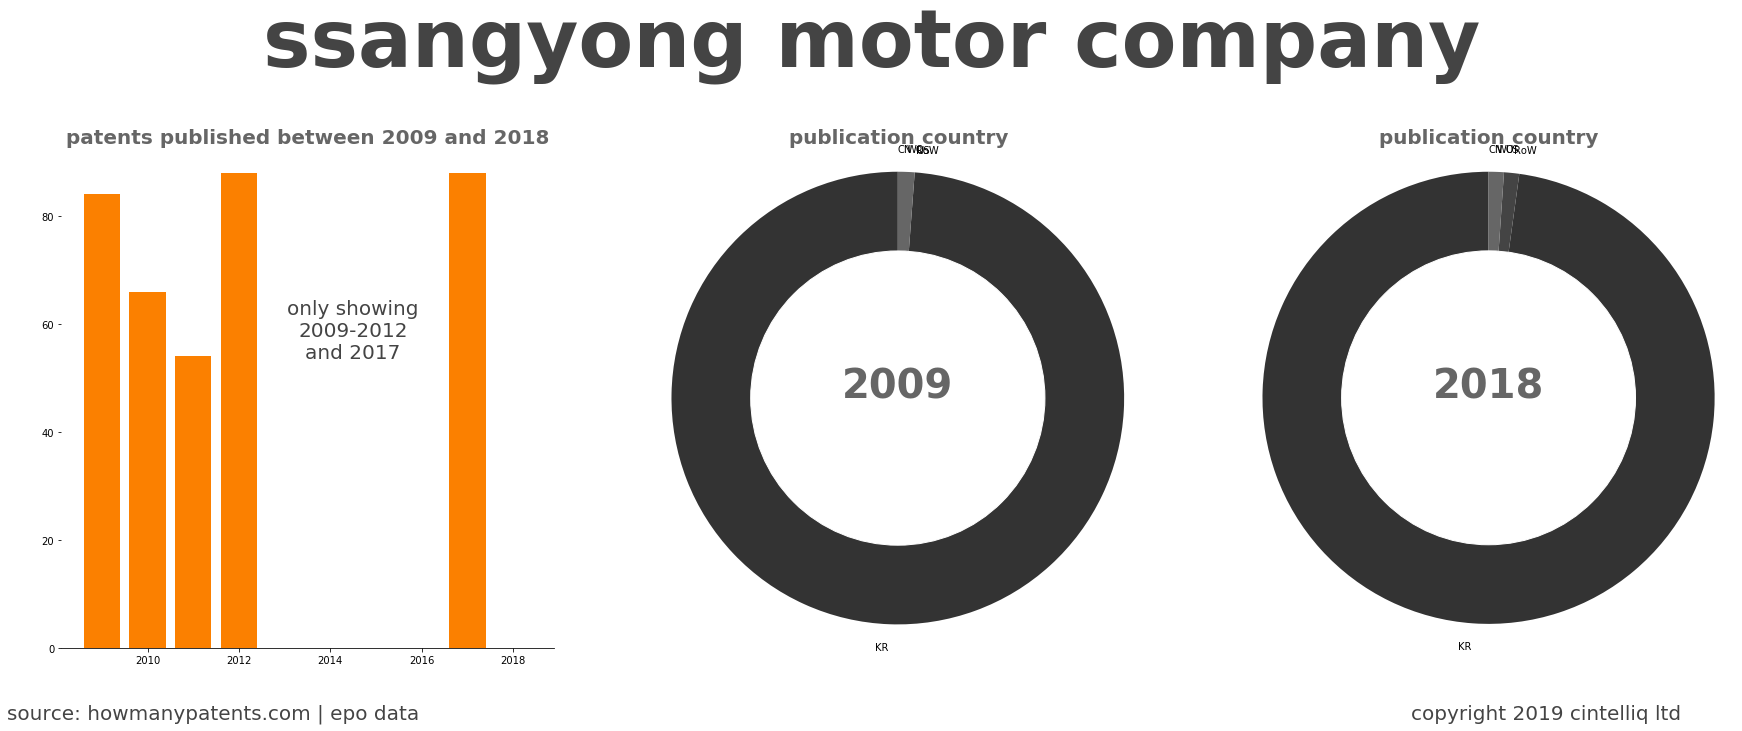 summary of patents for Ssangyong Motor Company